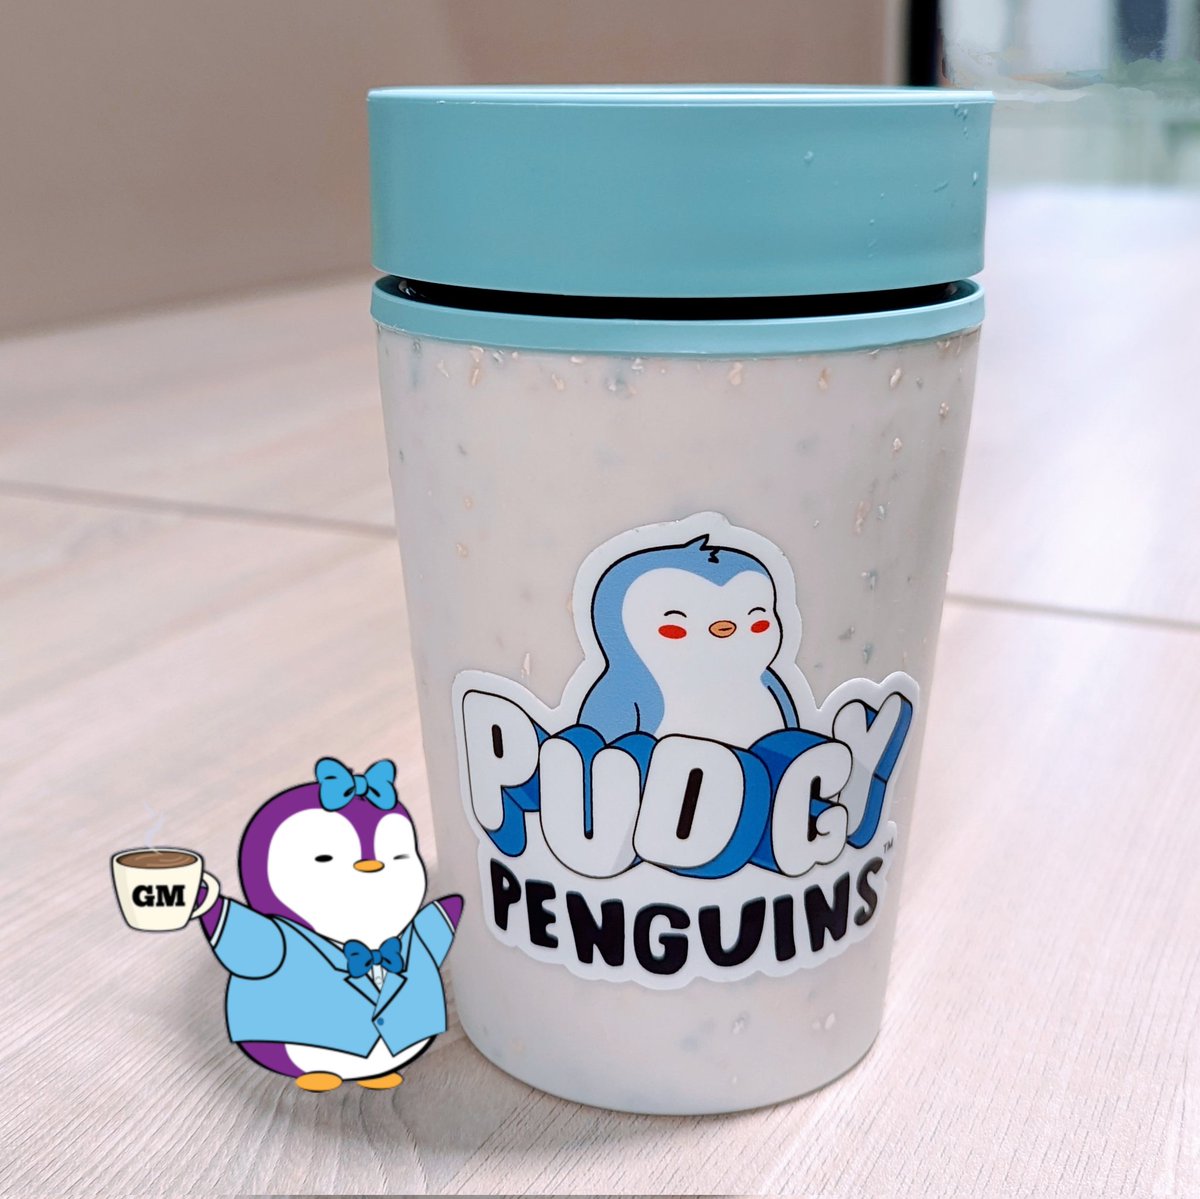 amping up the feel good vibes with one @pudgypenguins sticker at a time, which matches surprisingly well with the colour scheme of my @Circularandco reusable cup💙 #saynotosingleuse 🙅🏼🙅🏻‍♀️🙅🏾‍♂️